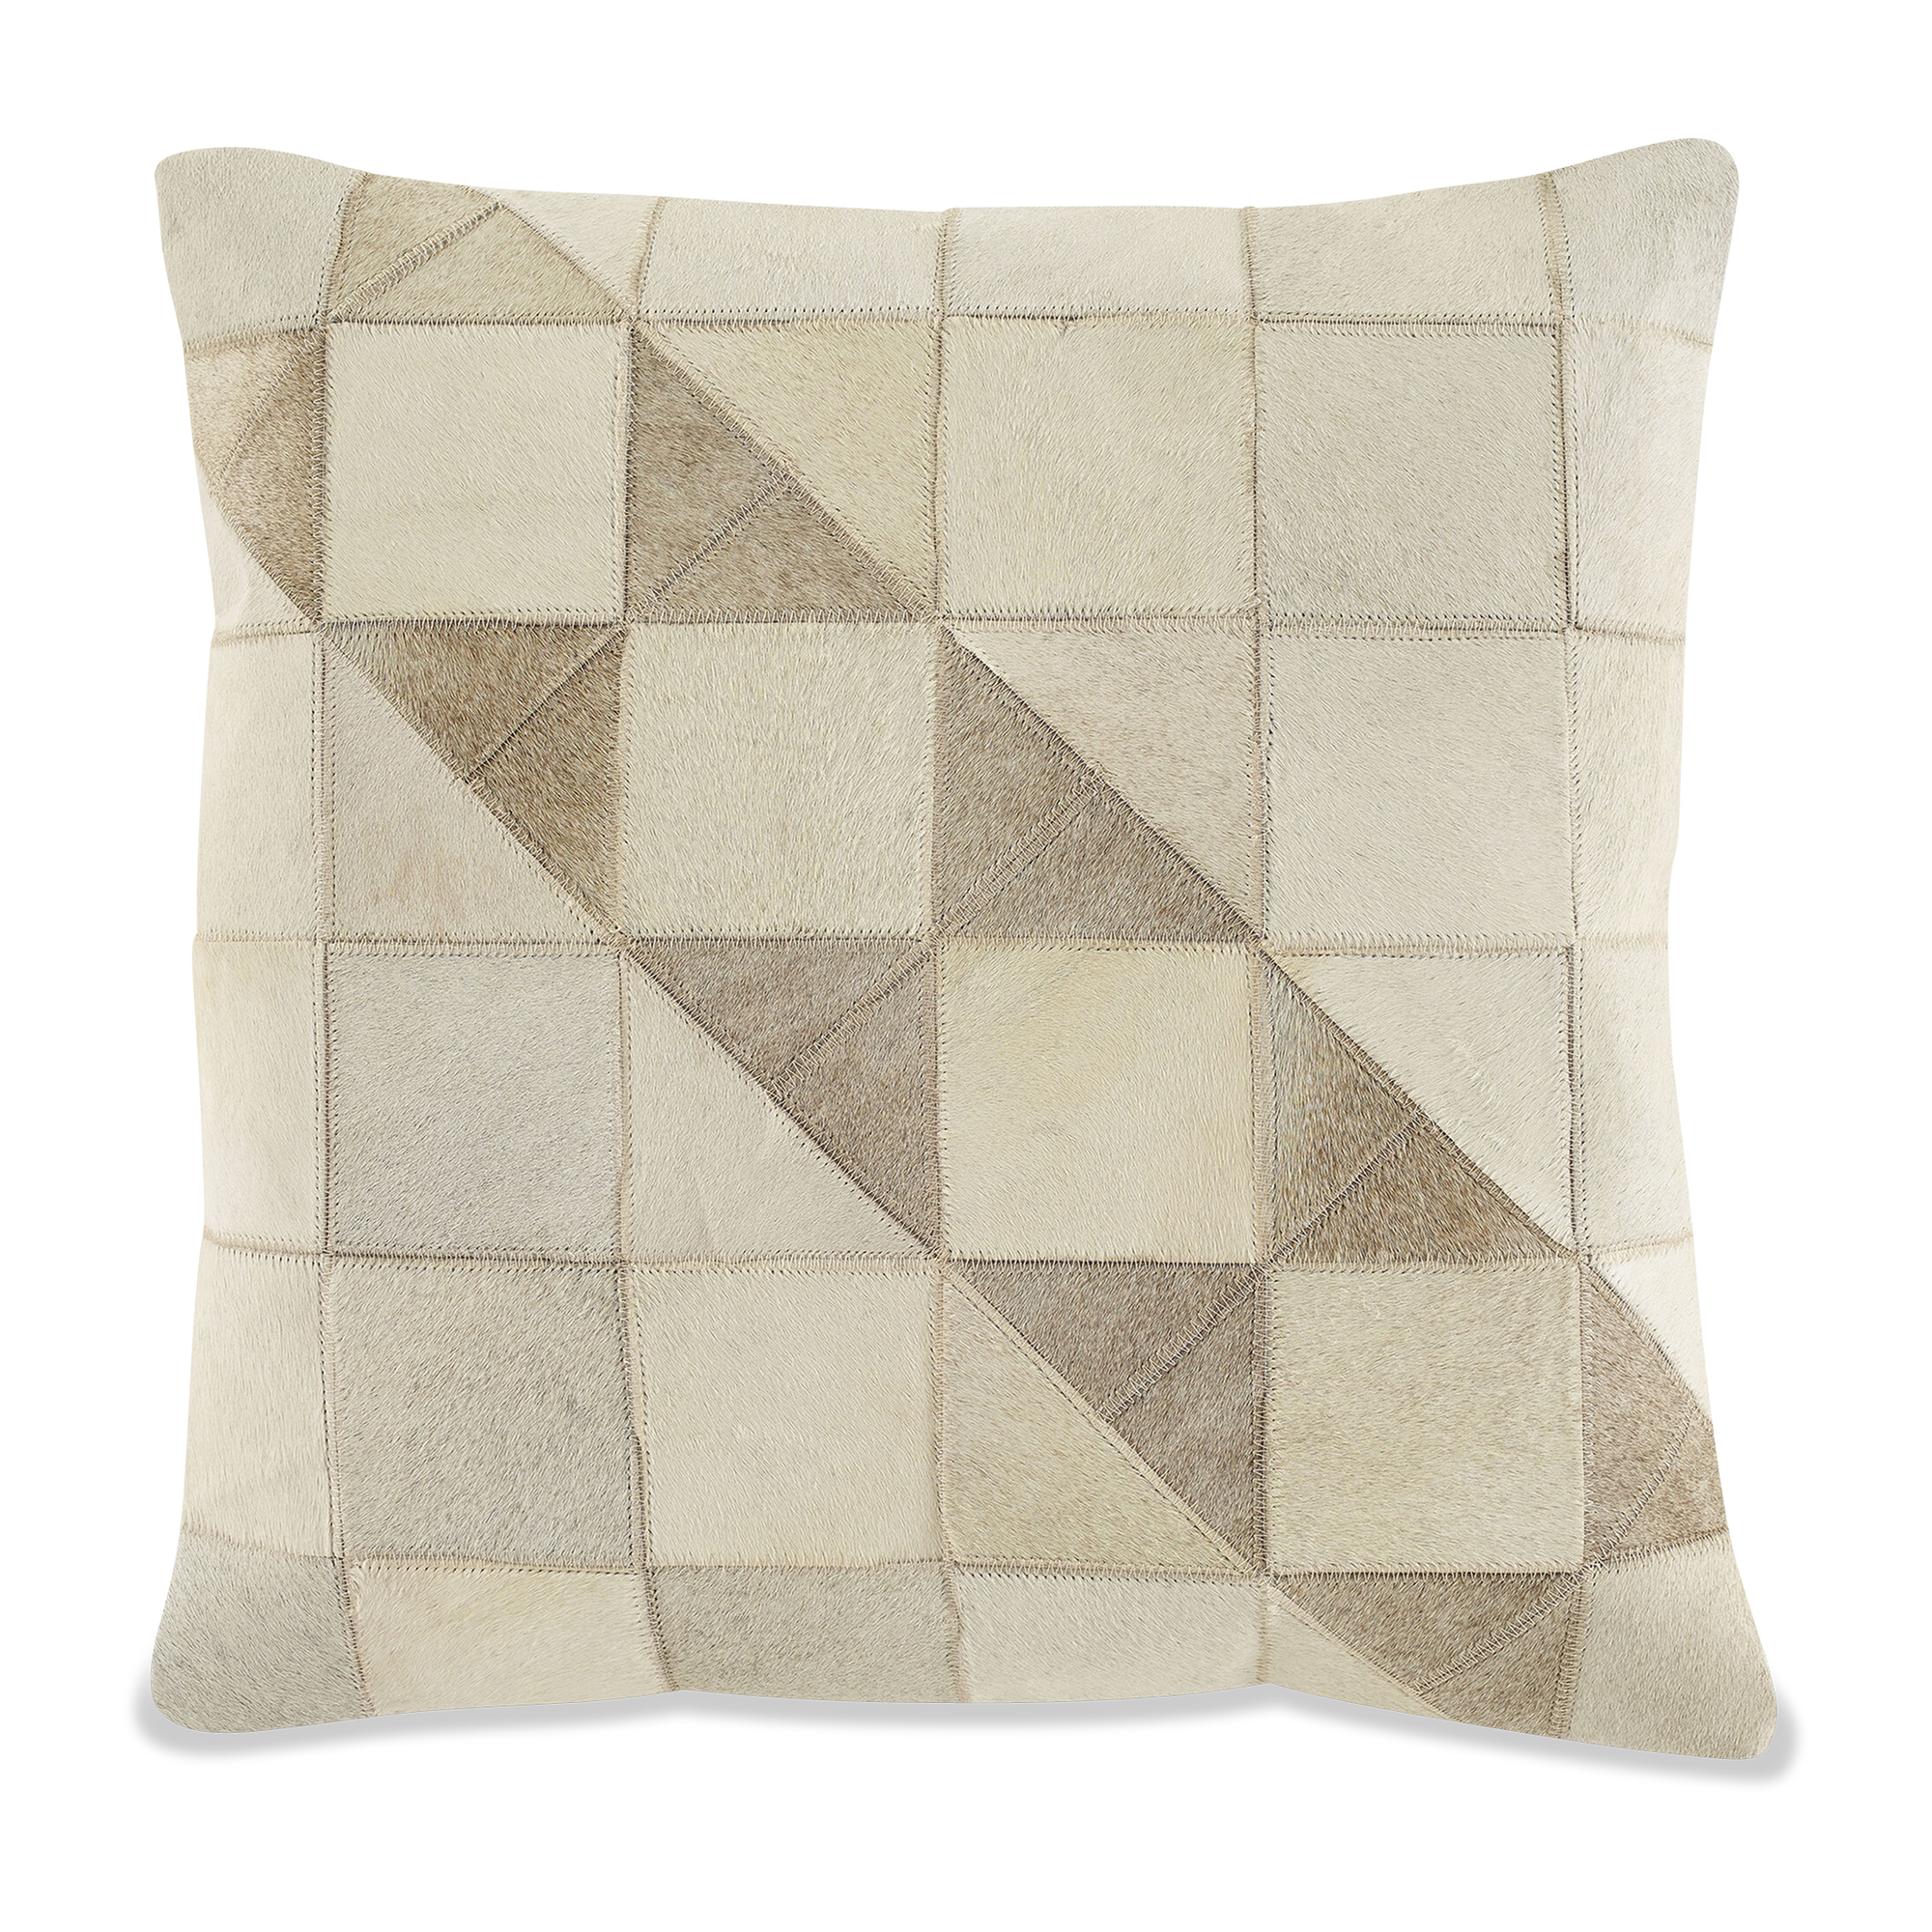 The detail and finish of the Tonal Triangles Hide Pillow featuring leather geometric detailing and a cotton back.